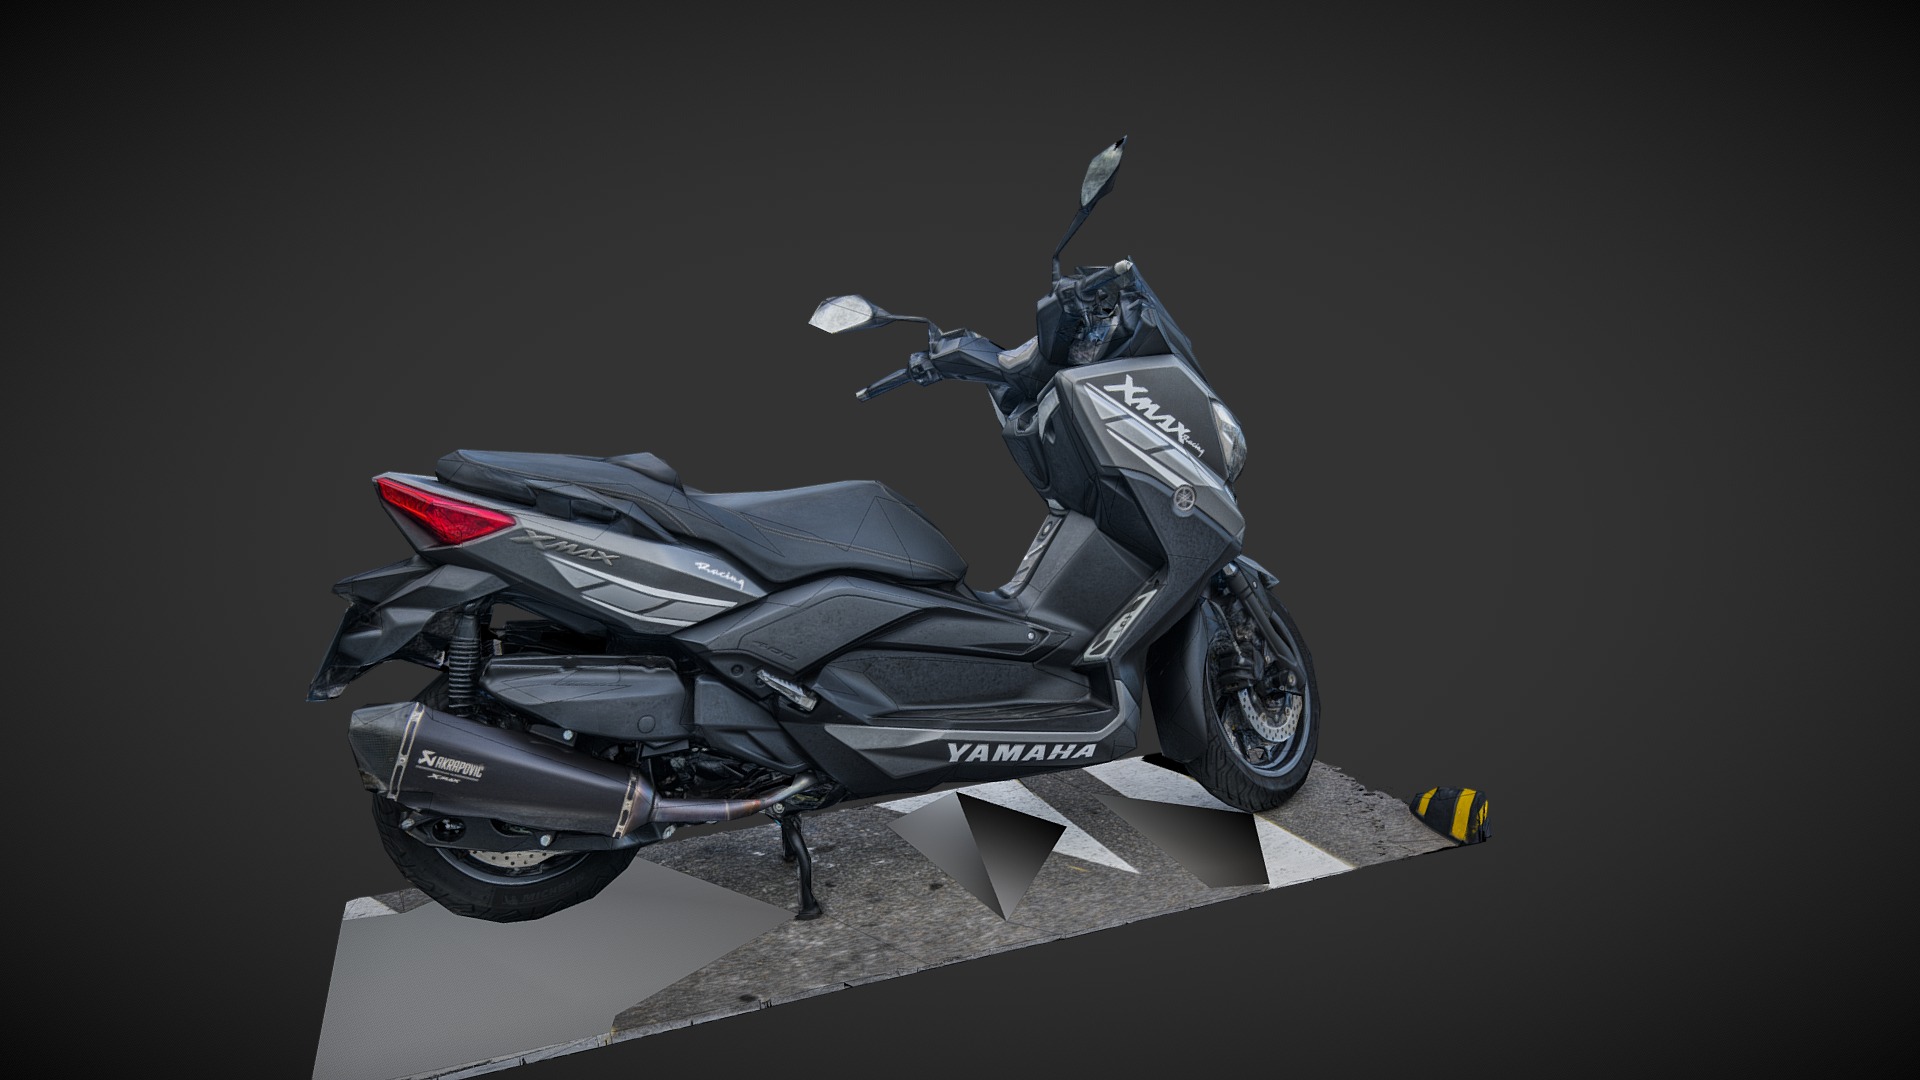 3D model Yamaha XMAX  photogrammetry scan (low poly) - This is a 3D model of the Yamaha XMAX  photogrammetry scan (low poly). The 3D model is about a black motorcycle on a stand.